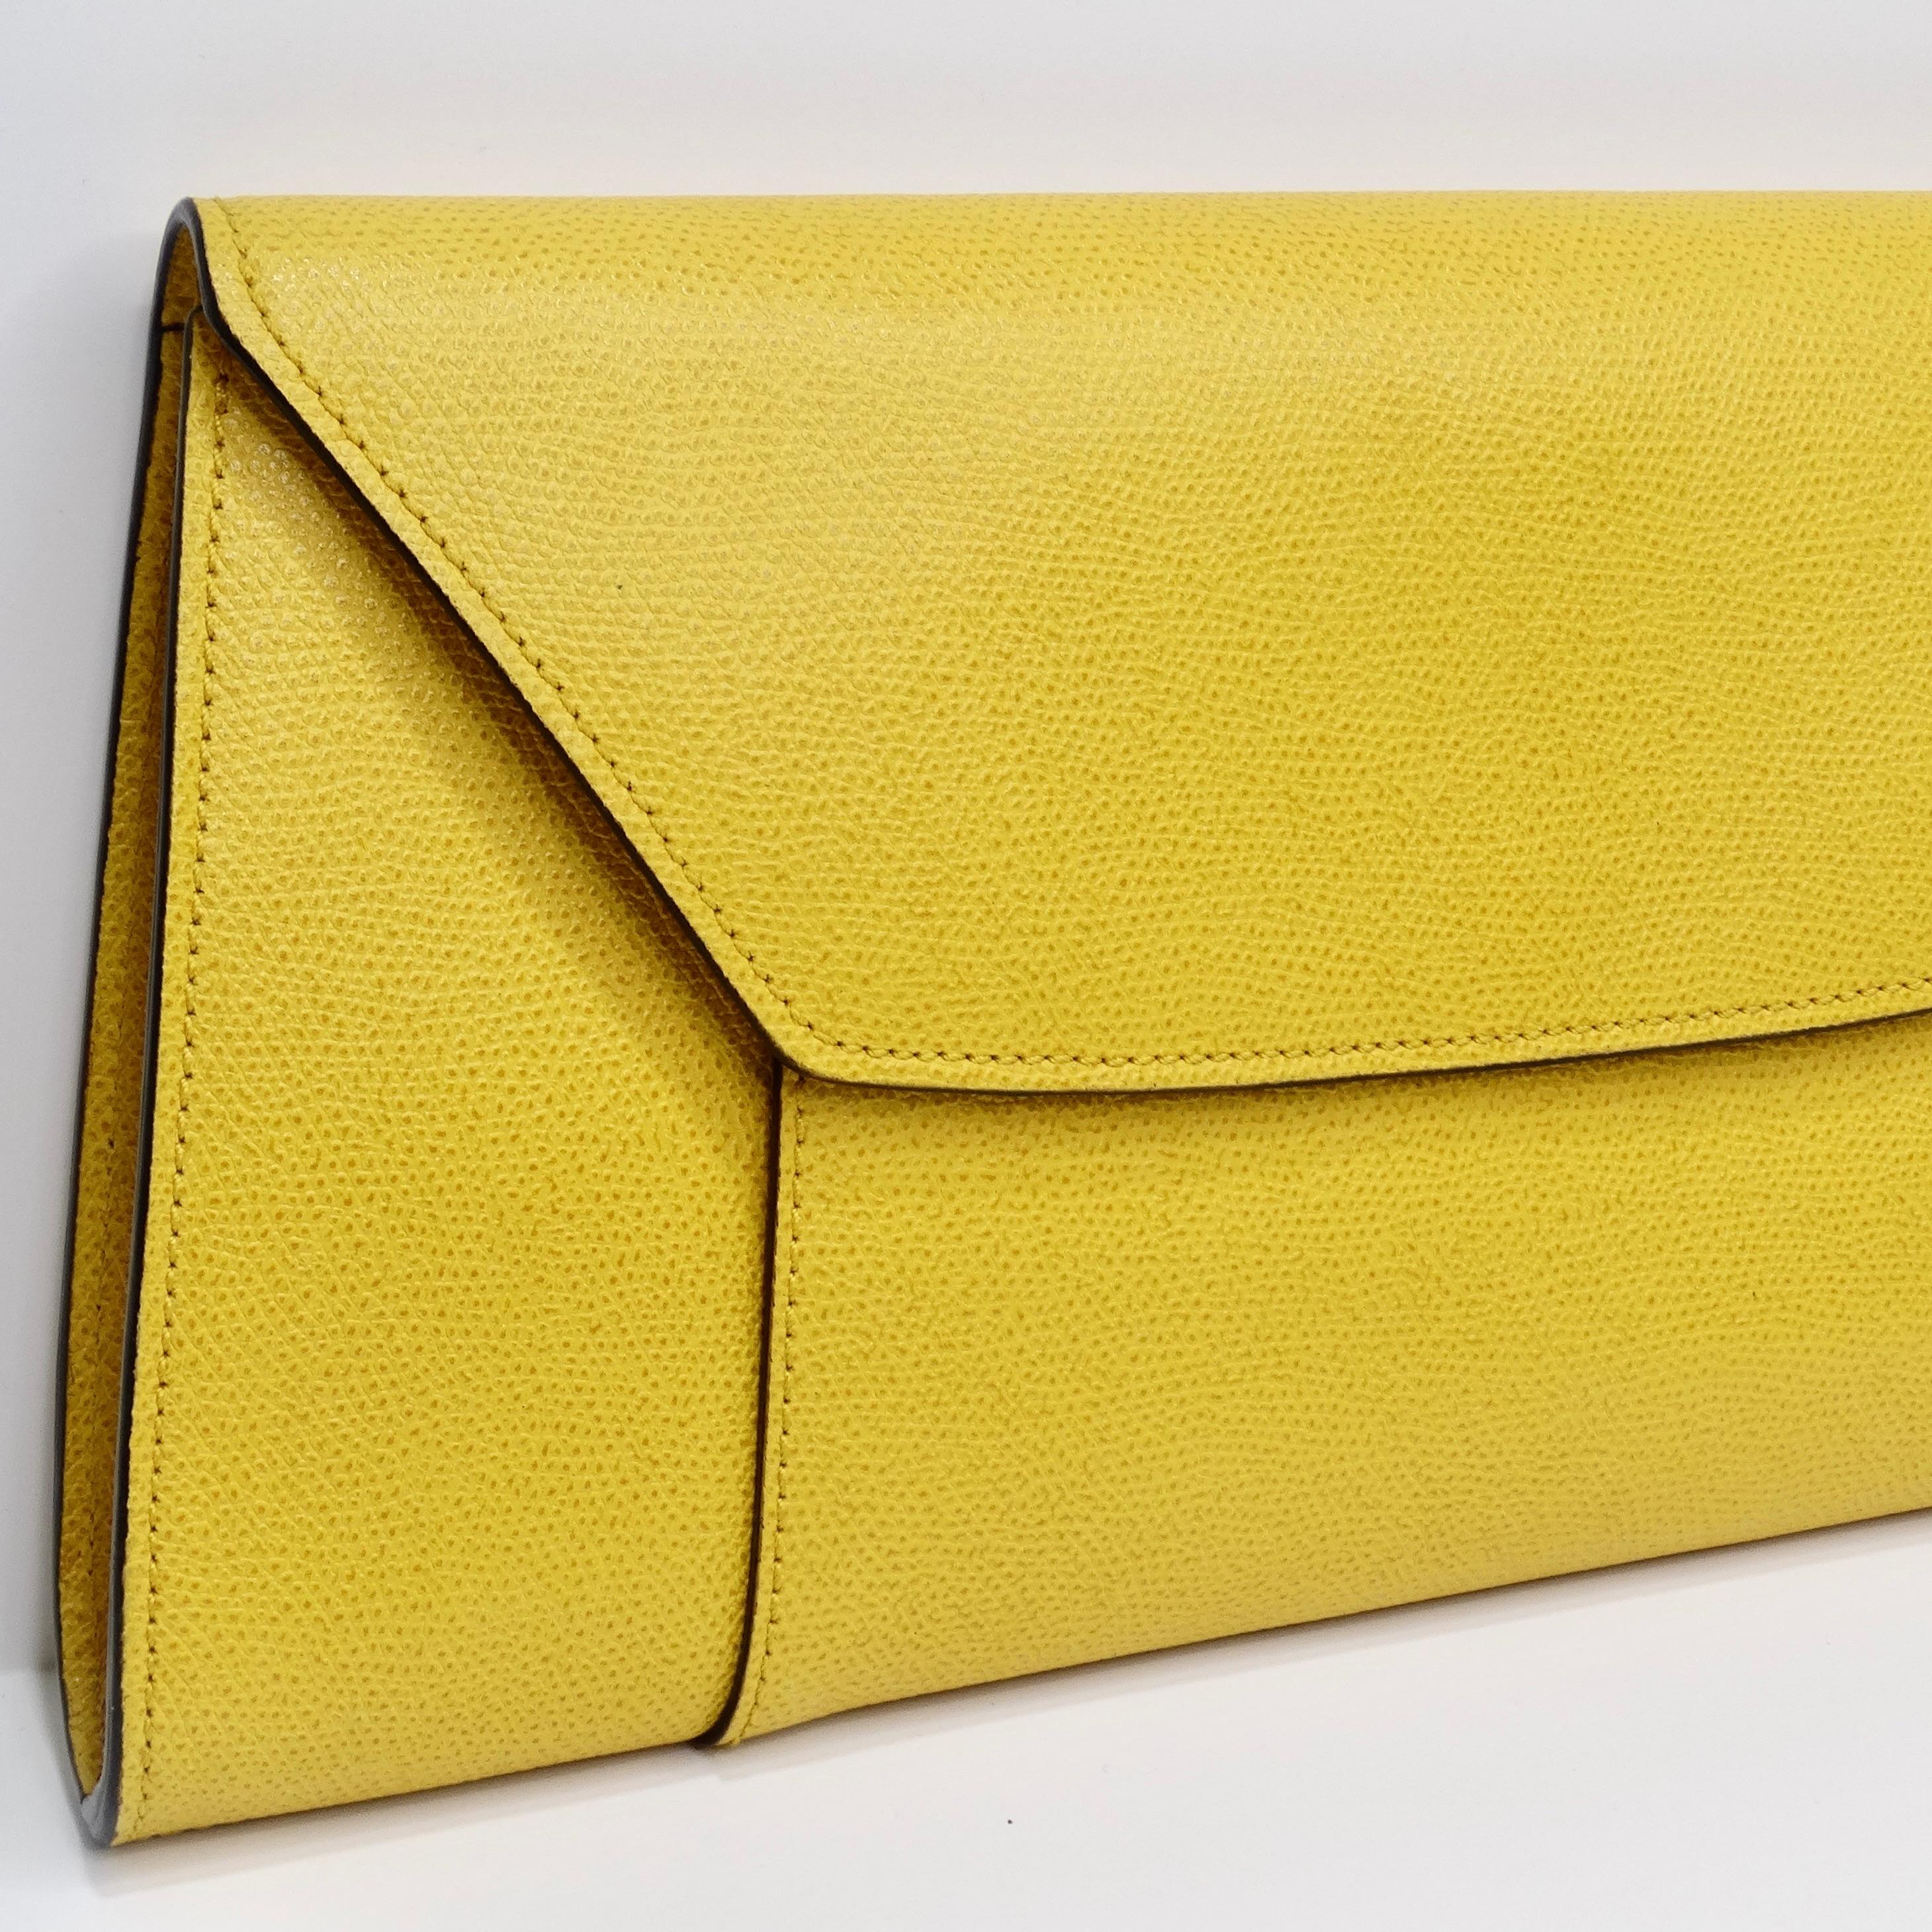 
Do not miss out on the Valextra Yellow Leather Clutch—a striking and contemporary accessory that will undoubtedly make a statement. This sleek rectangle clutch is a testament to modern design and high-quality craftsmanship. Crafted in a vibrant